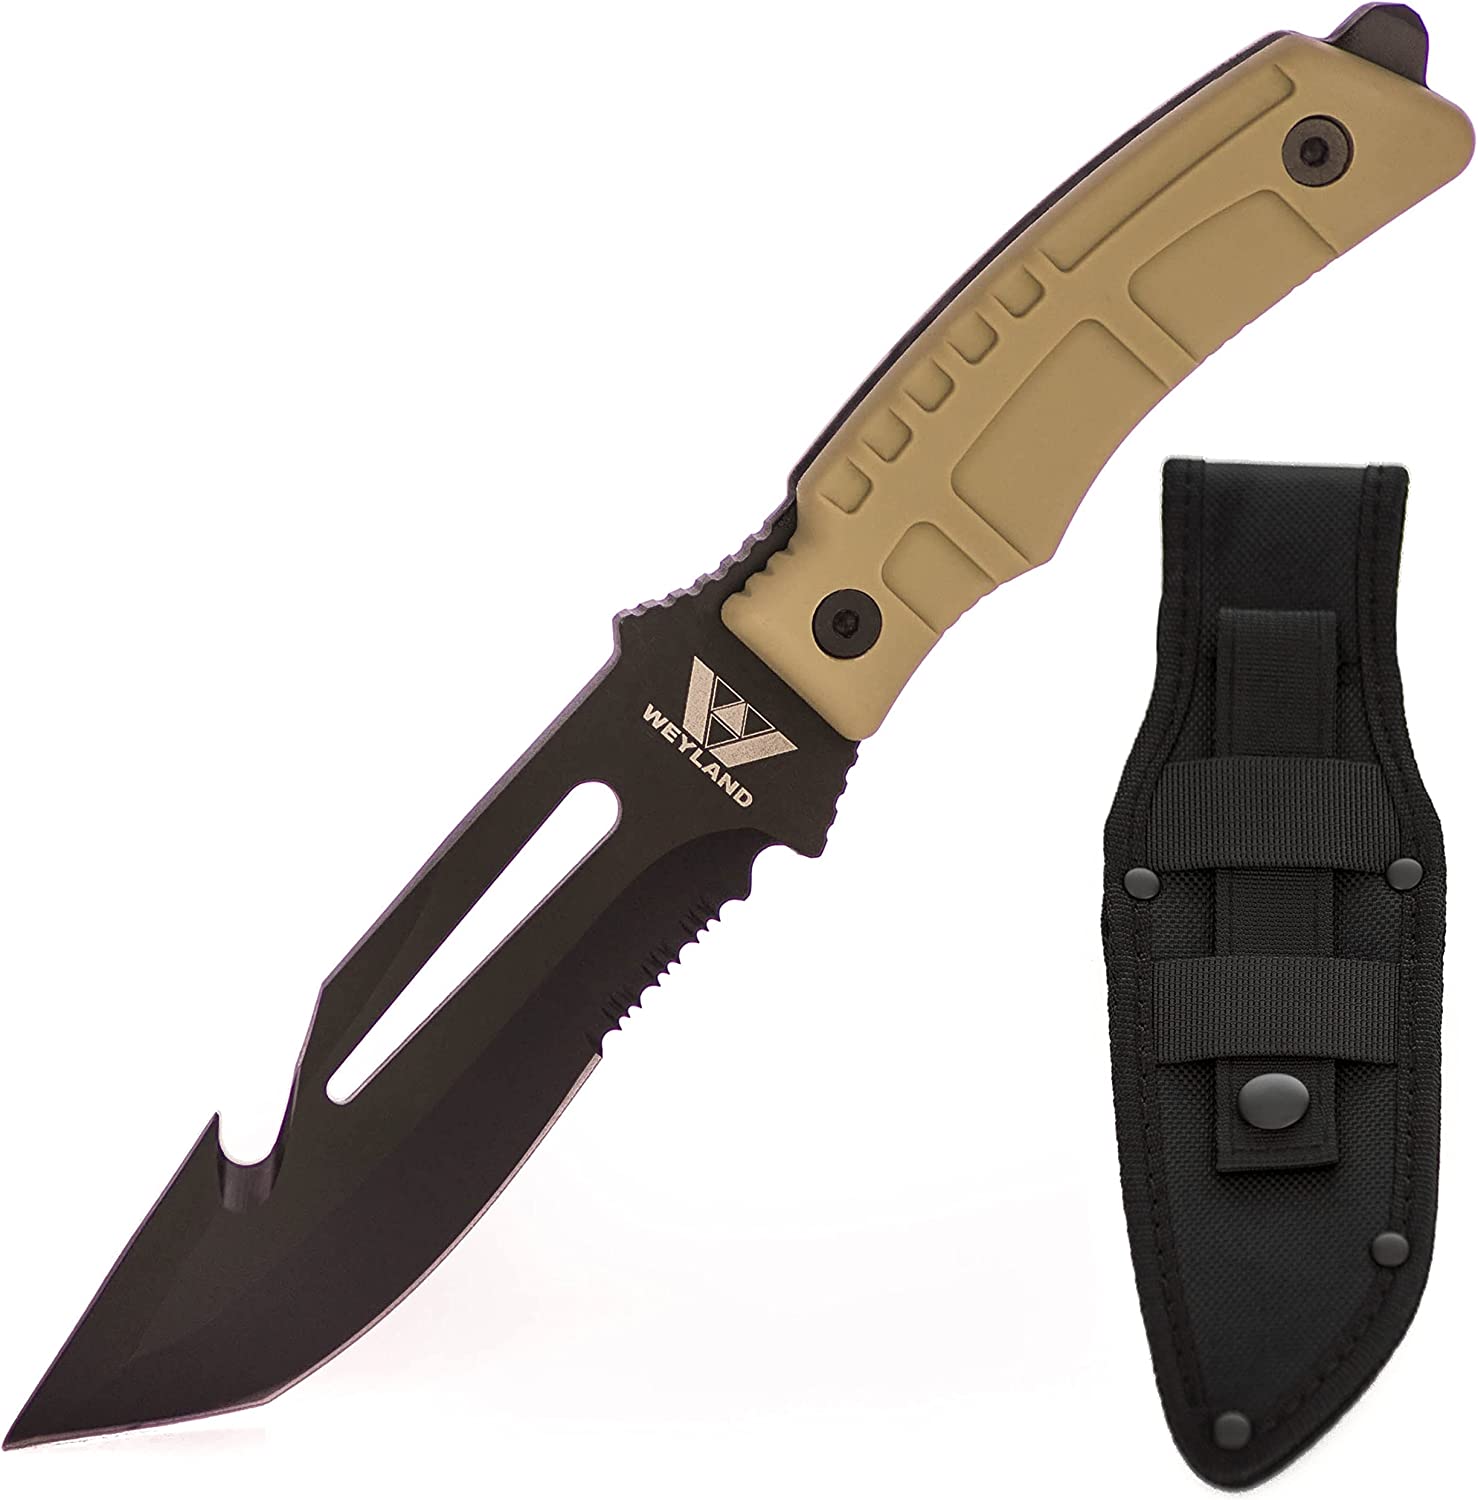 WEYLAND Tactical Hunting Knife with MOLLE Sheath – Bugout Bushcraft Knife and Outdoor Hiking or Camping Knife, Fixed Blade Full Tang Boy Scout Knife